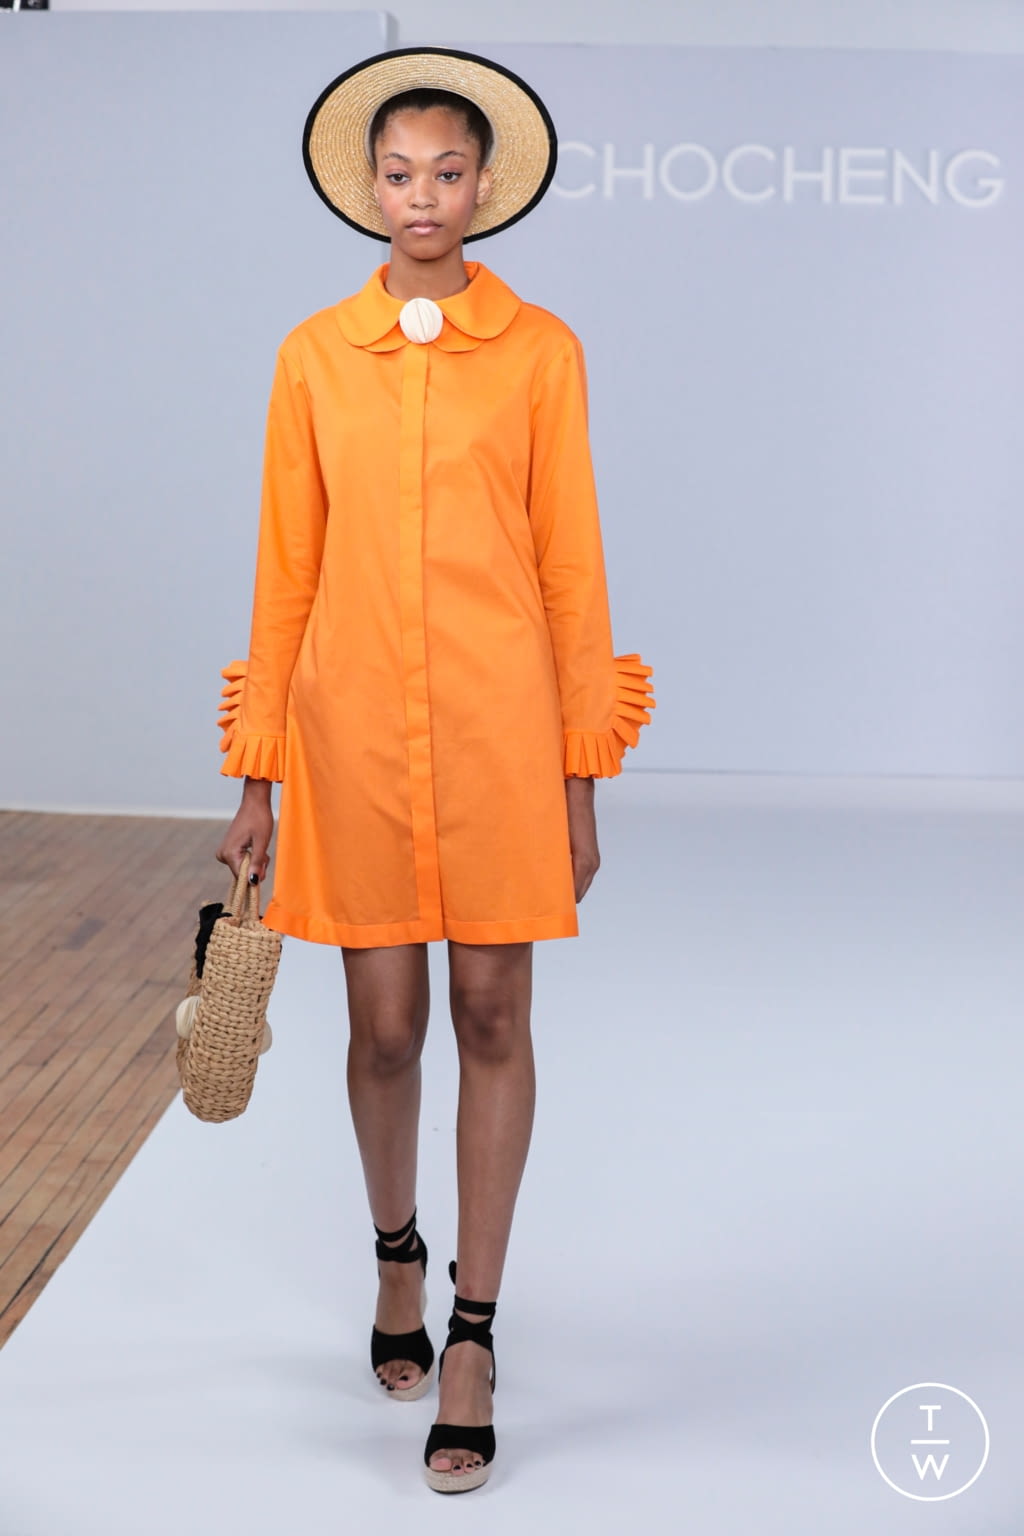 Fashion Week New York Spring/Summer 2021 look 15 from the Chocheng collection womenswear